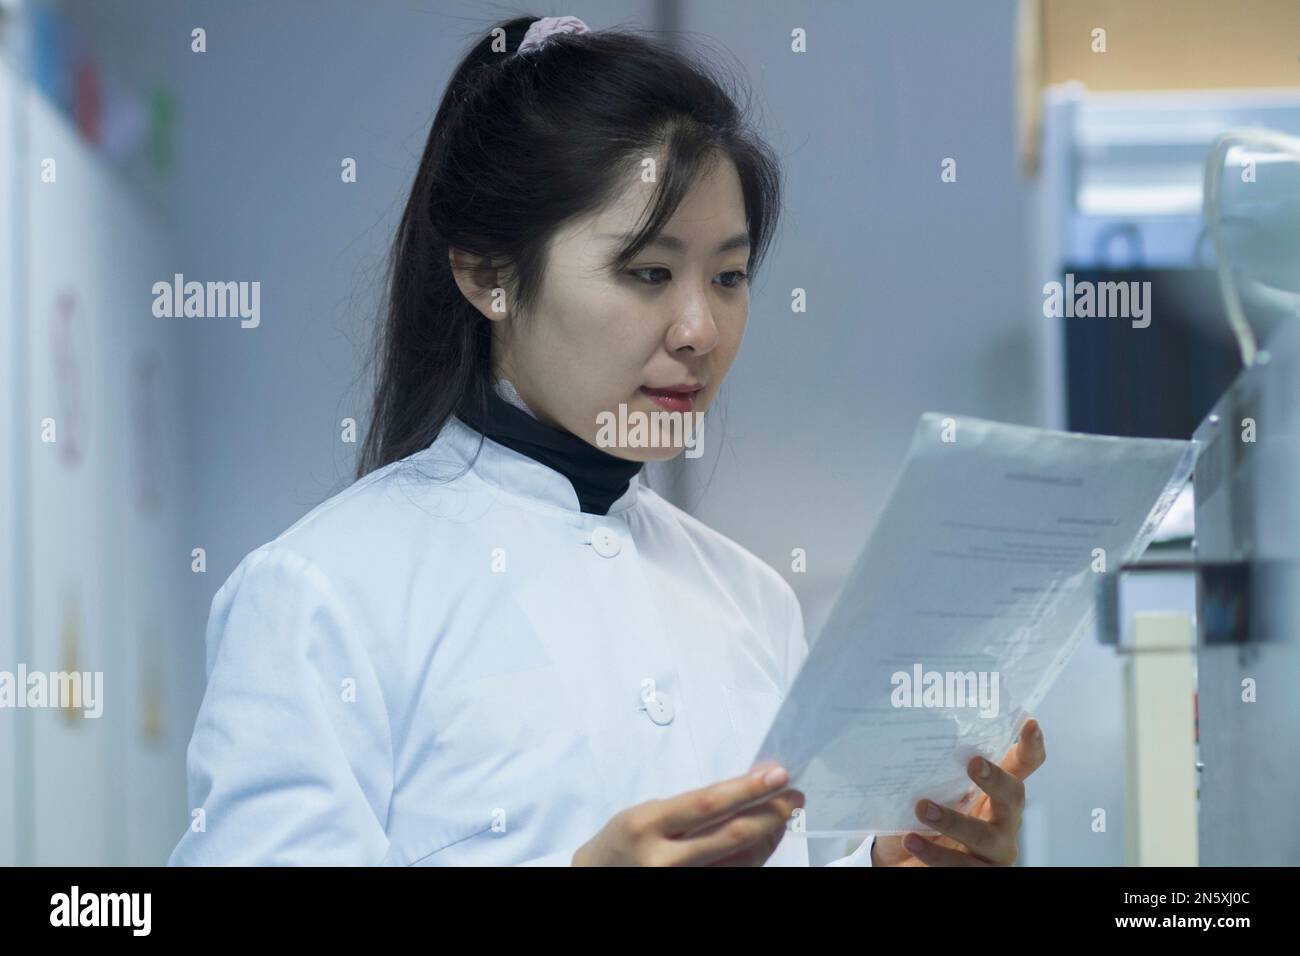 Young female scientist looking at report in a laboratory, Freiburg im Breisgau, Baden-Württemberg, Germany Stock Photo